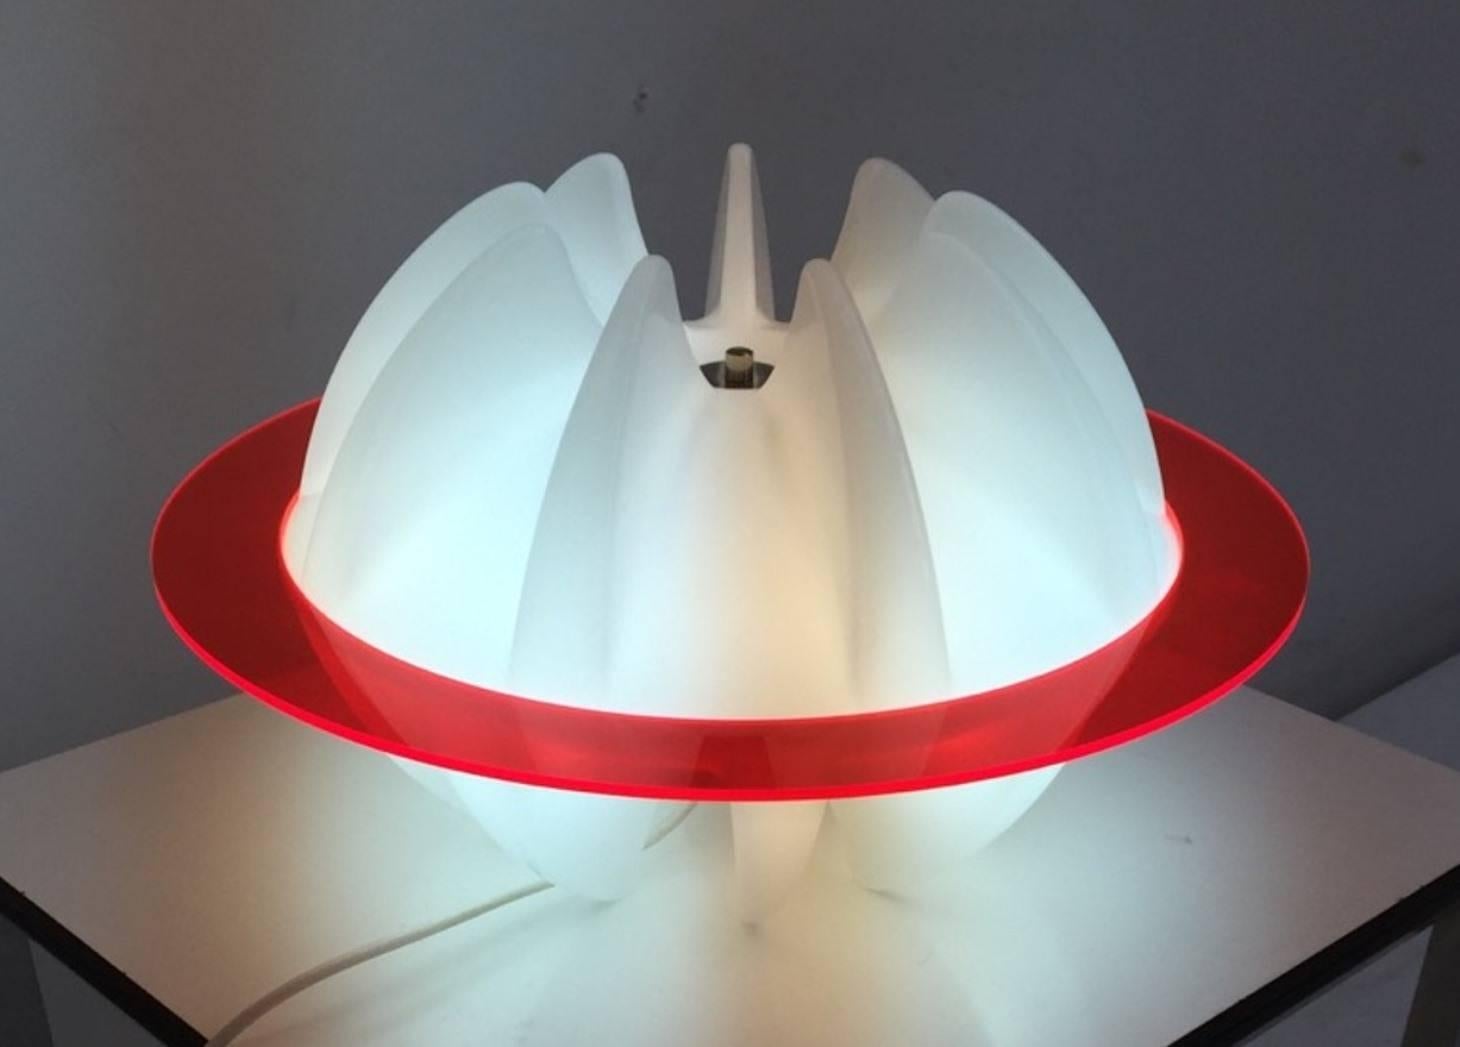 Amazing and super rare Italian plexiglass light sculpture from the classic 1965-73 period of radical, Avant Garde Italian design in the style of the utopian radical, Italian architect's groups of the period such as Lapo Binazzi's 'UFO', 'Gruppo 65',